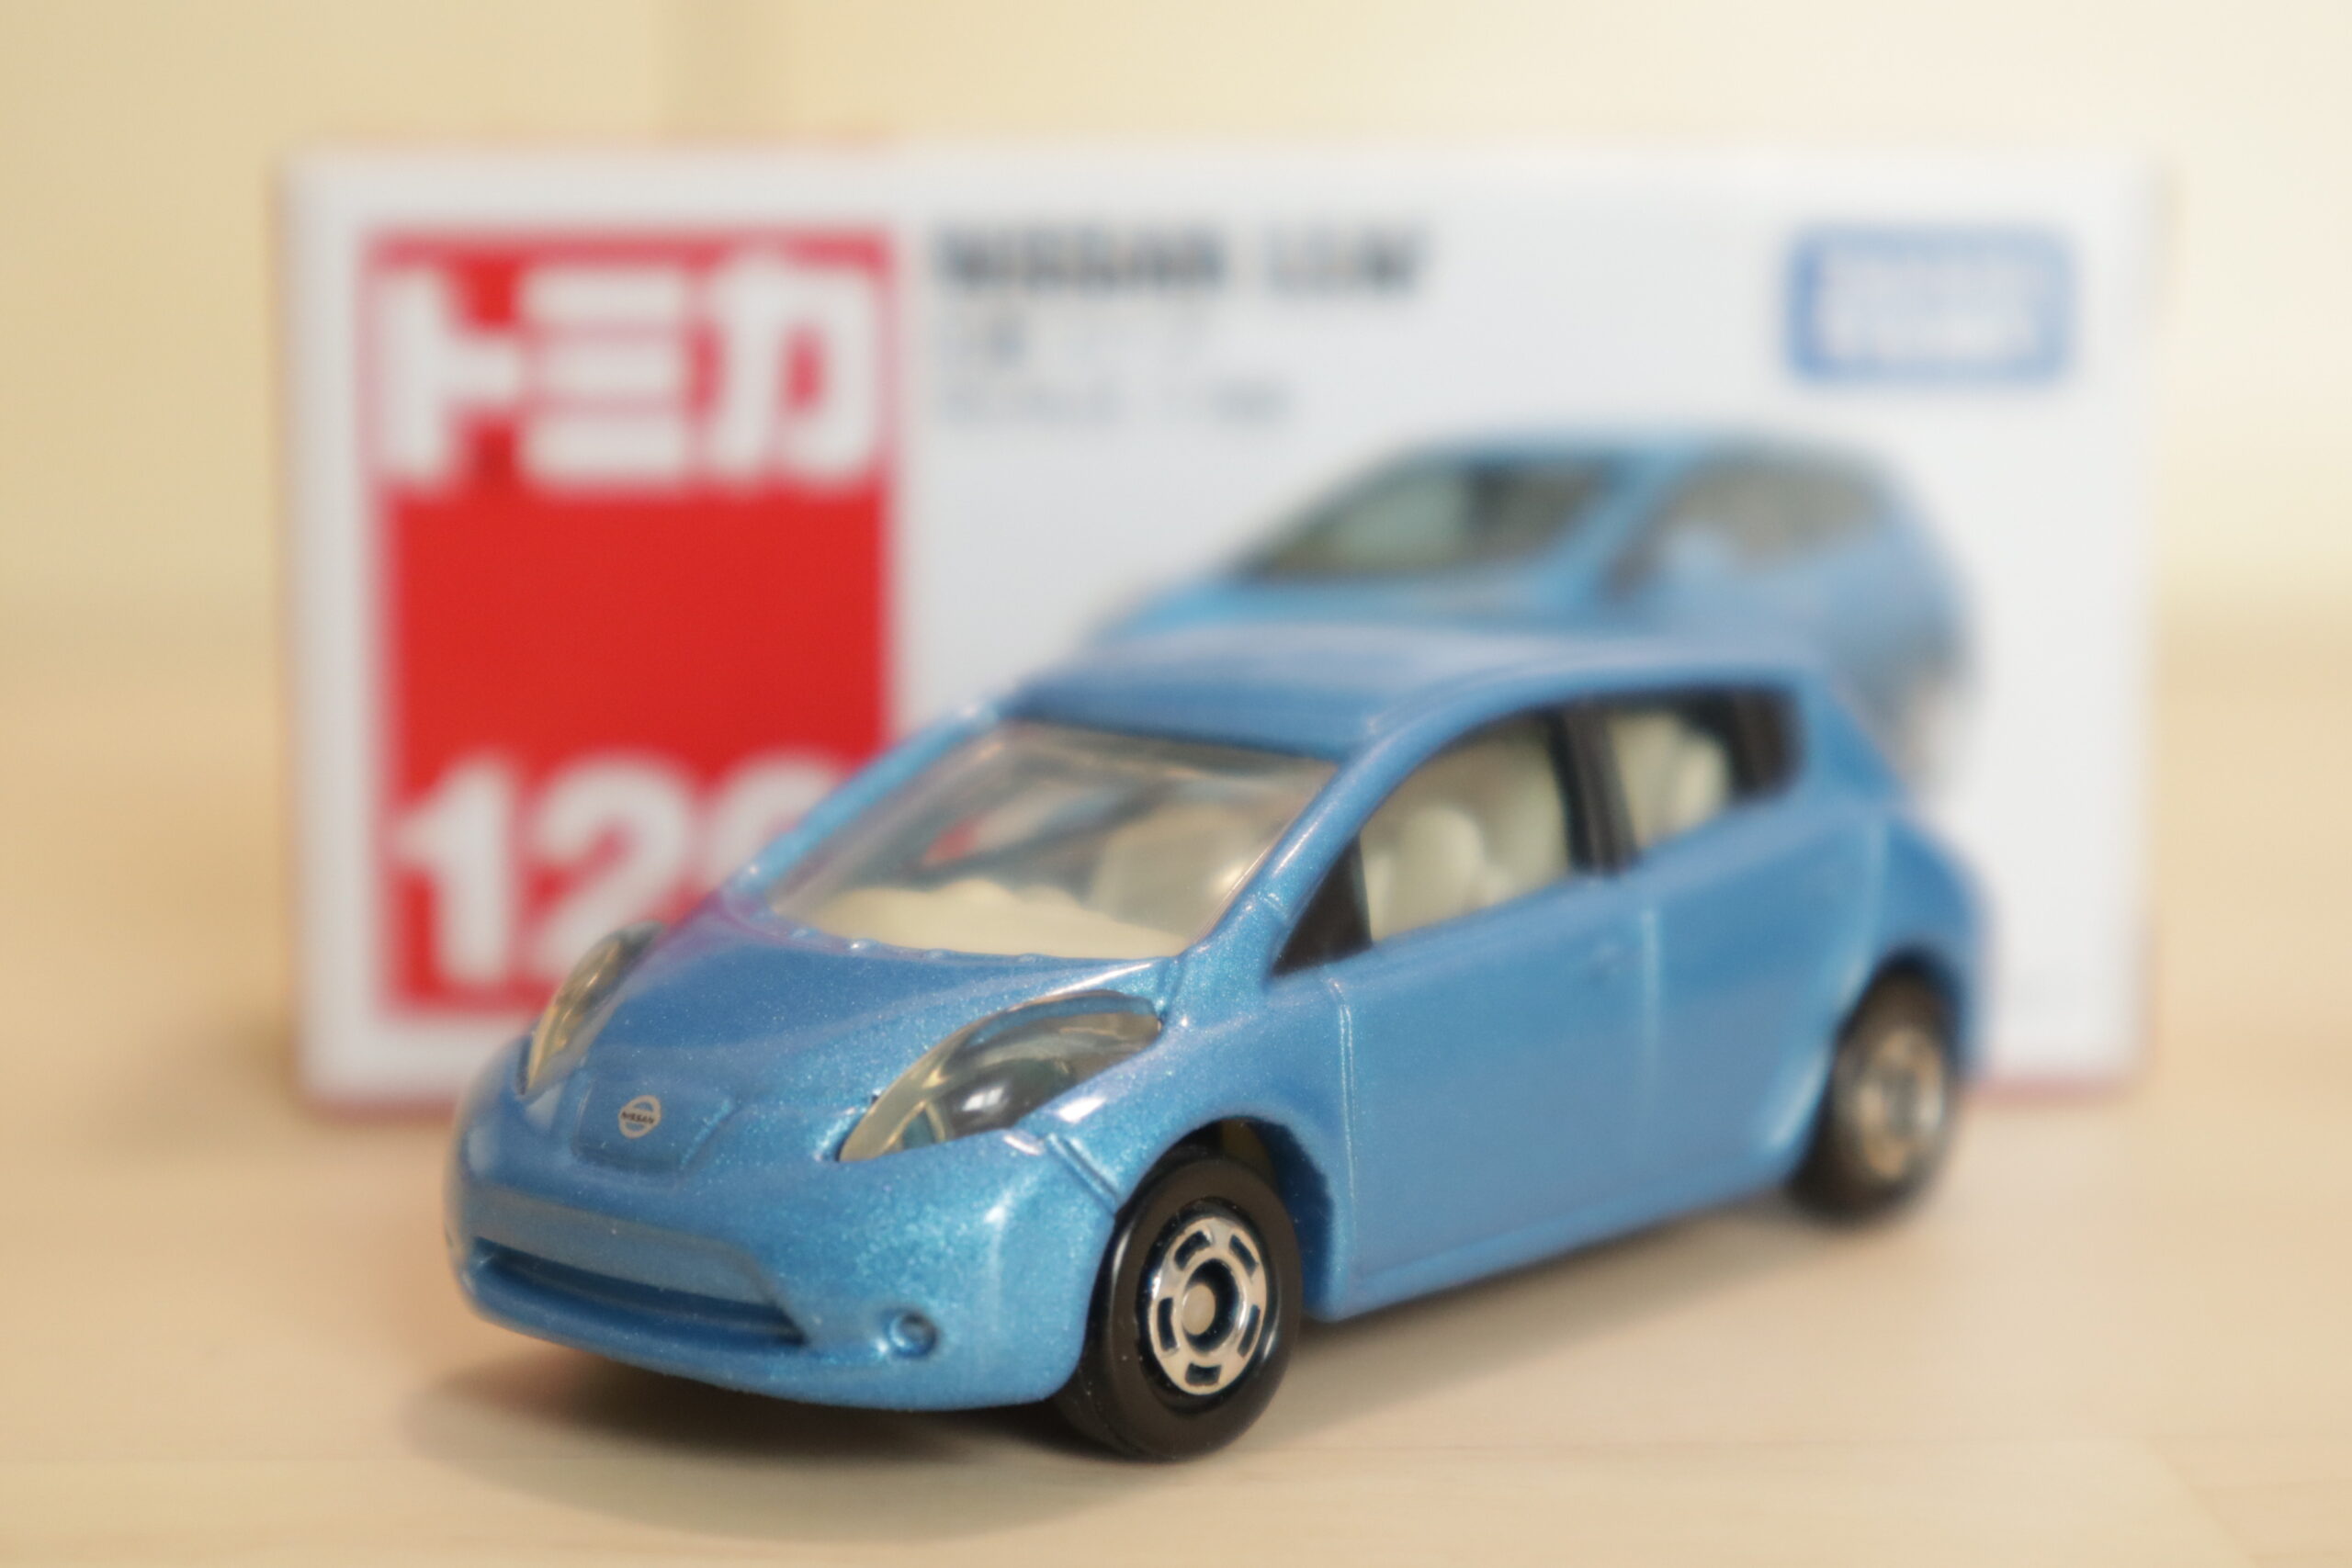 Tomica No.120】日産 リーフ【じっくり観察】 | とりかん！